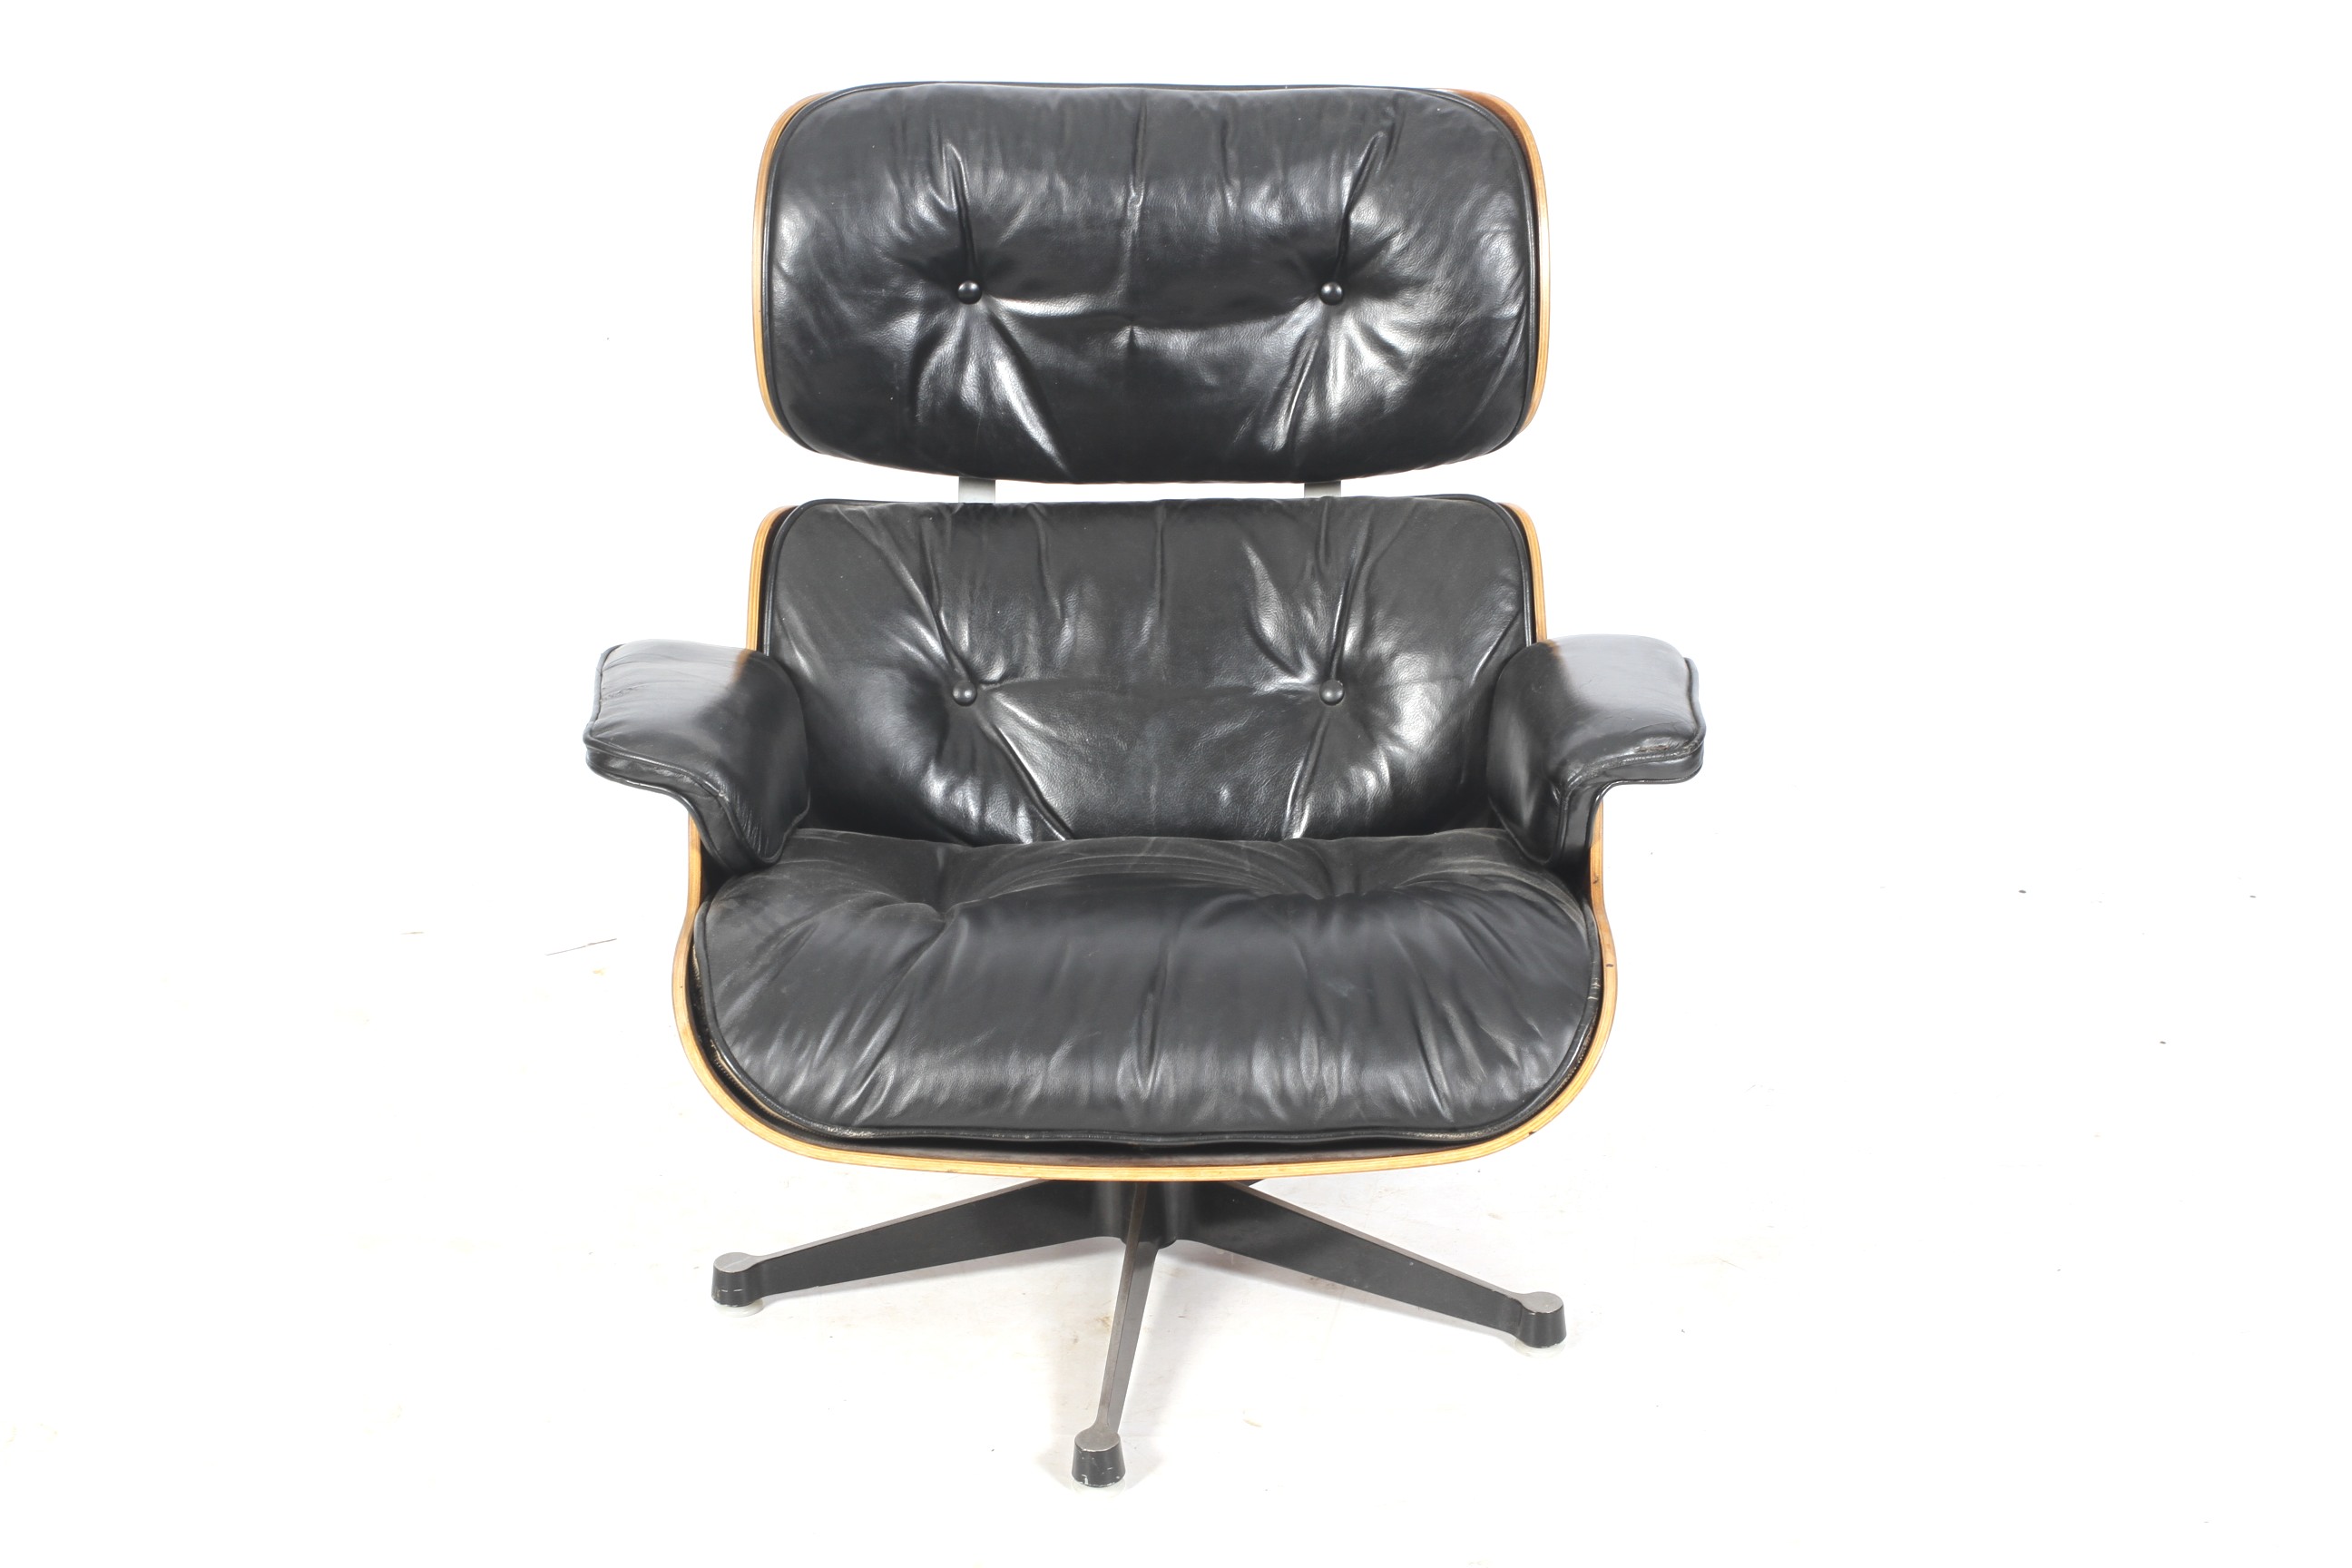 A Charles & Ray Eames for Herman Miller lounge chair model 670. - Image 2 of 4